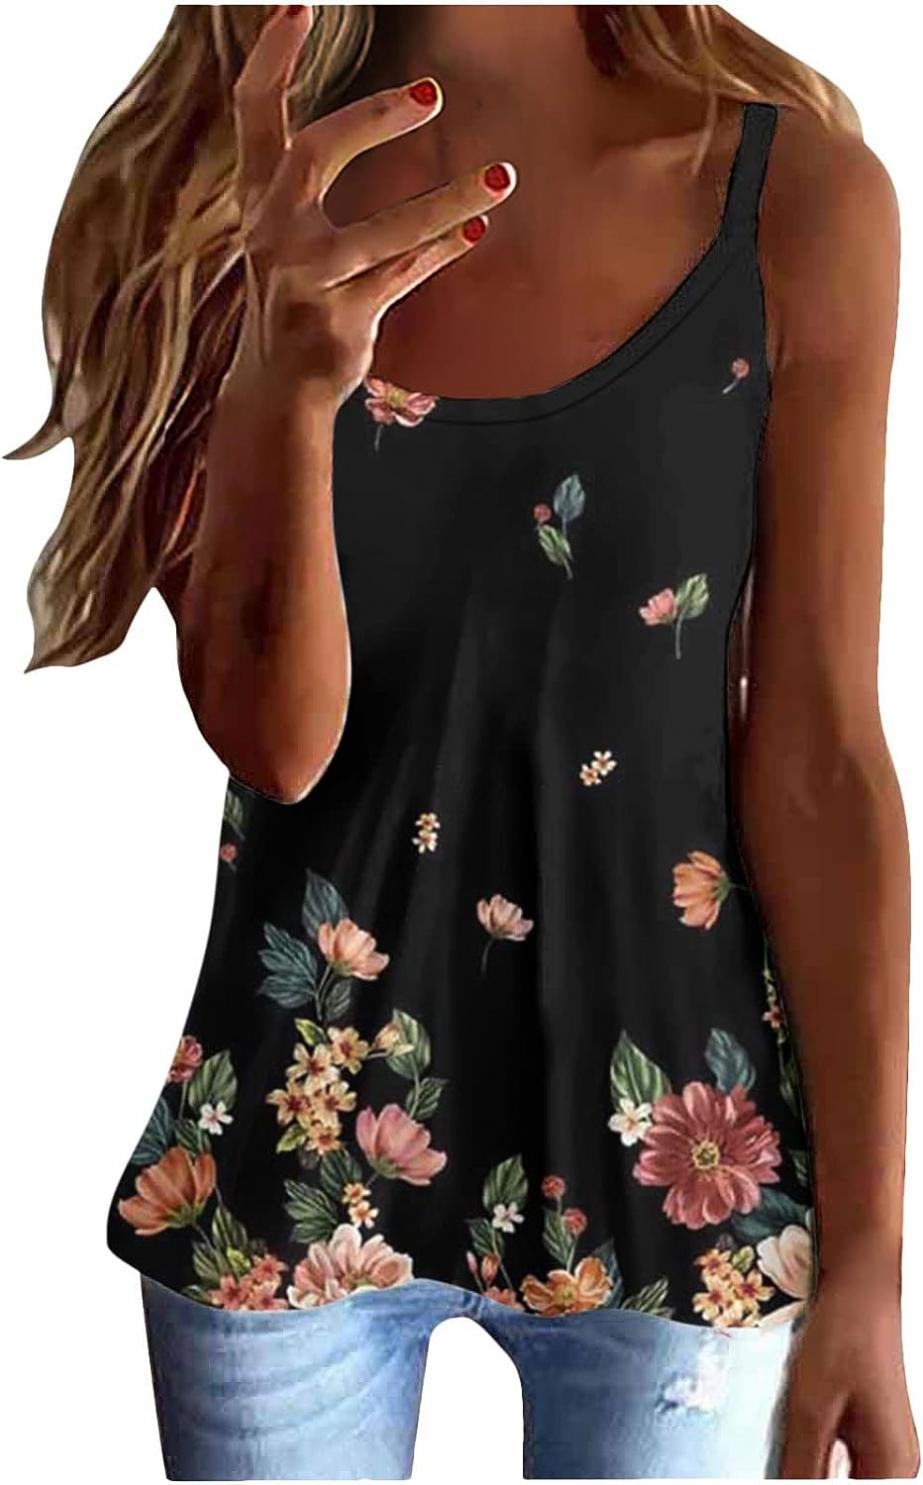 Women Tank Tops Camisole Cami Top Casual Flowy Summer Sleeveless Tunic Tshirts Cami Vest Ruched Tops Hide Belly Tops